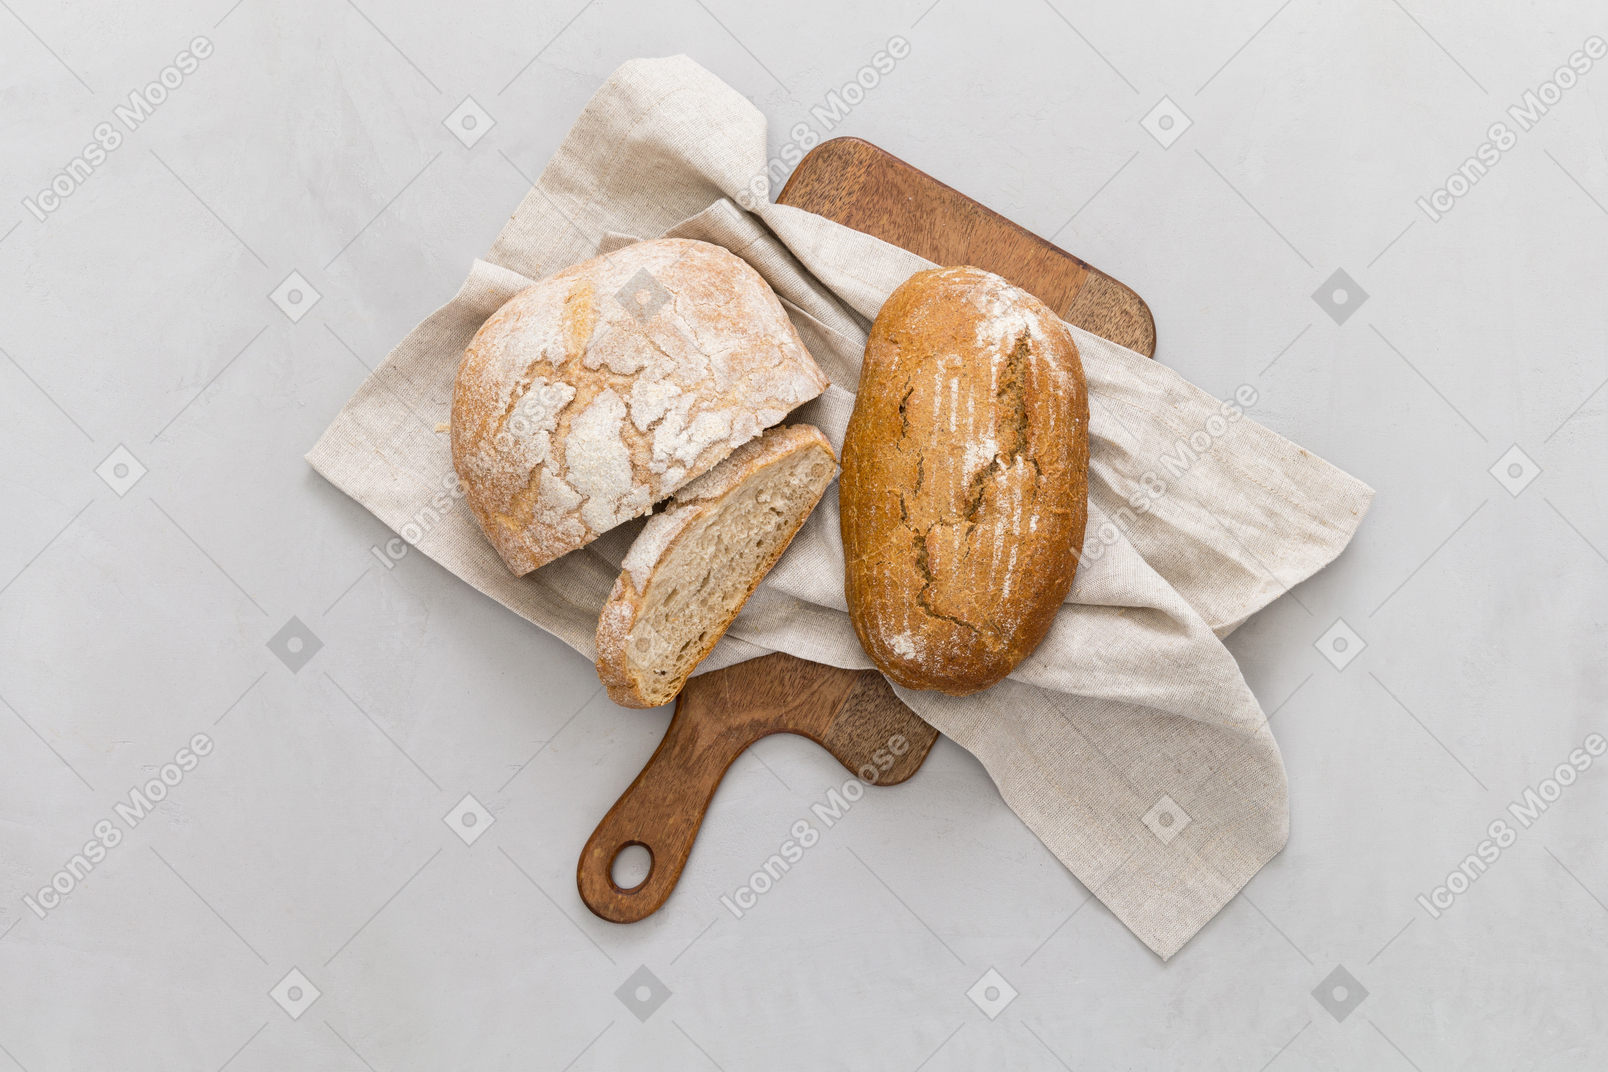 Bread is the staff of life